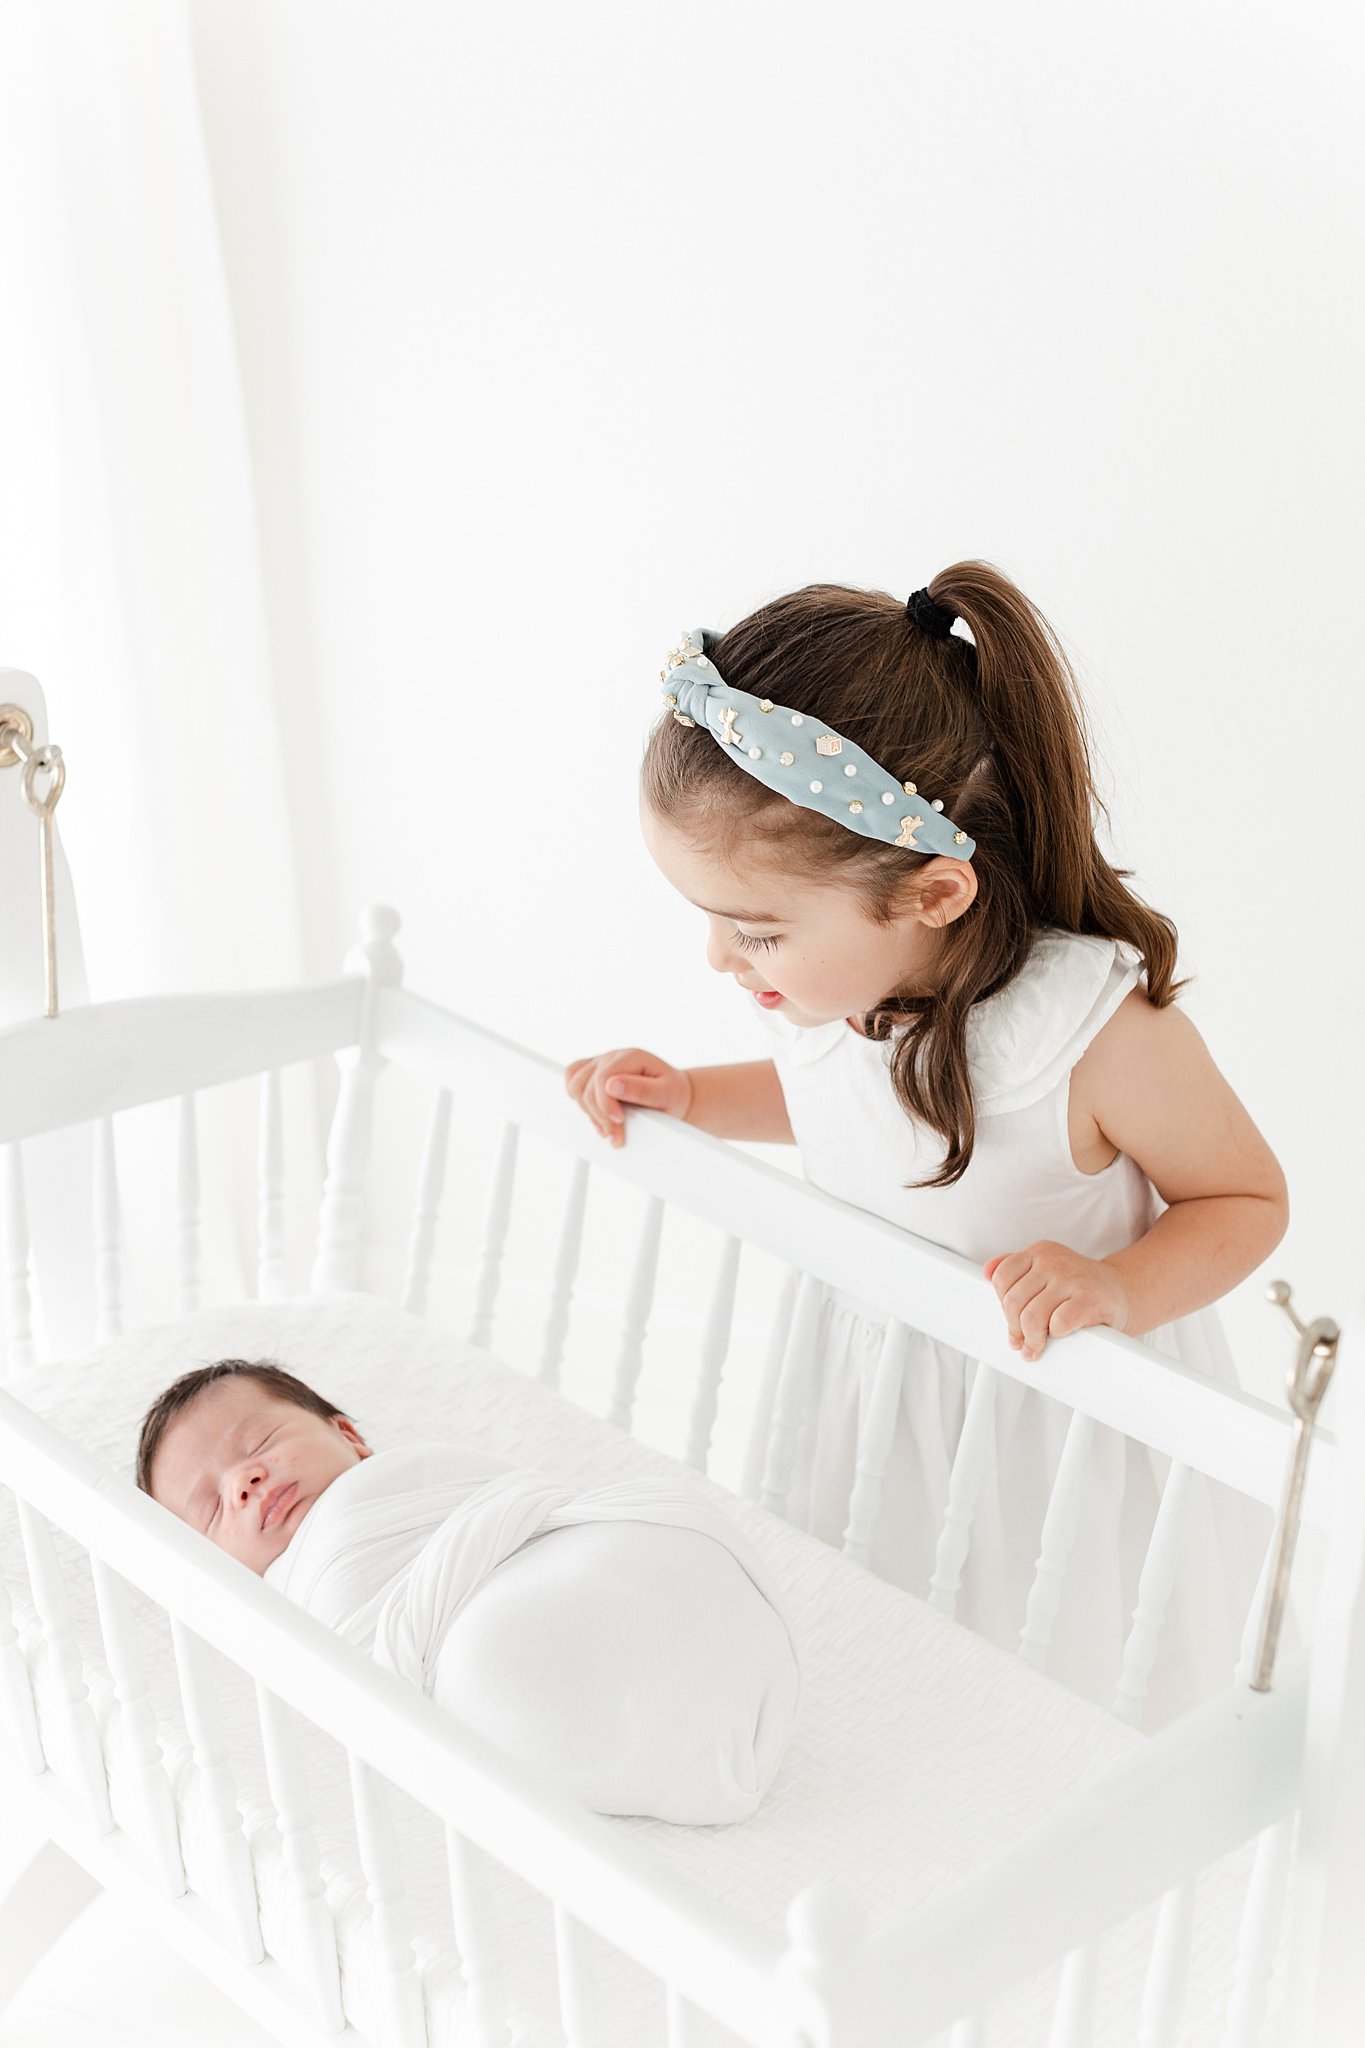 A young girl leans over the crib to see her sleeping newborn sibling